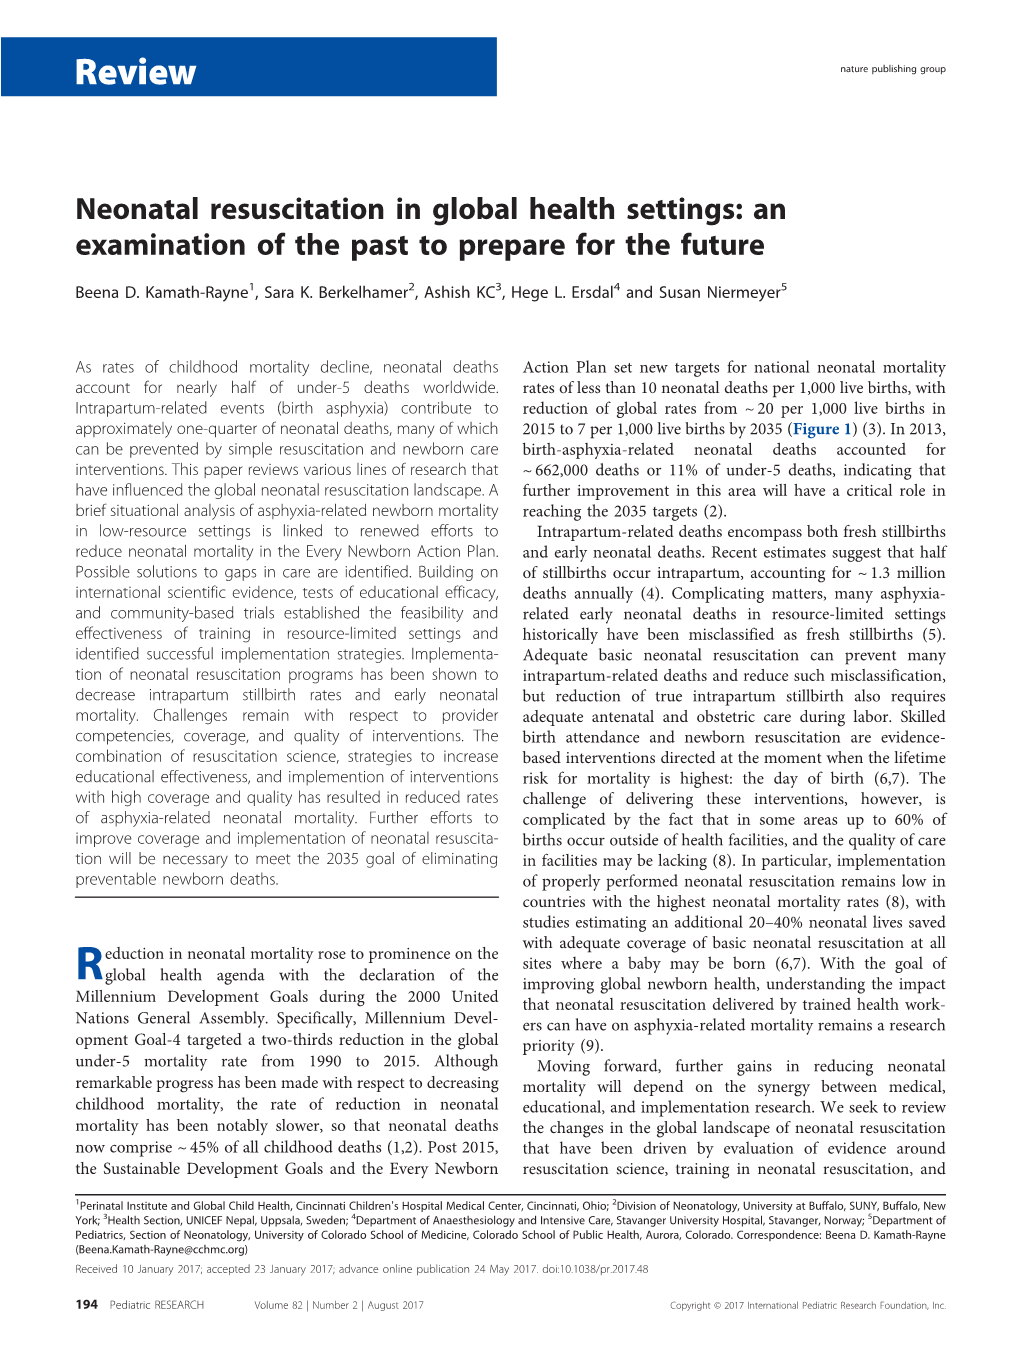 Neonatal Resuscitation in Global Health Settings: an Examination of the Past to Prepare for the Future